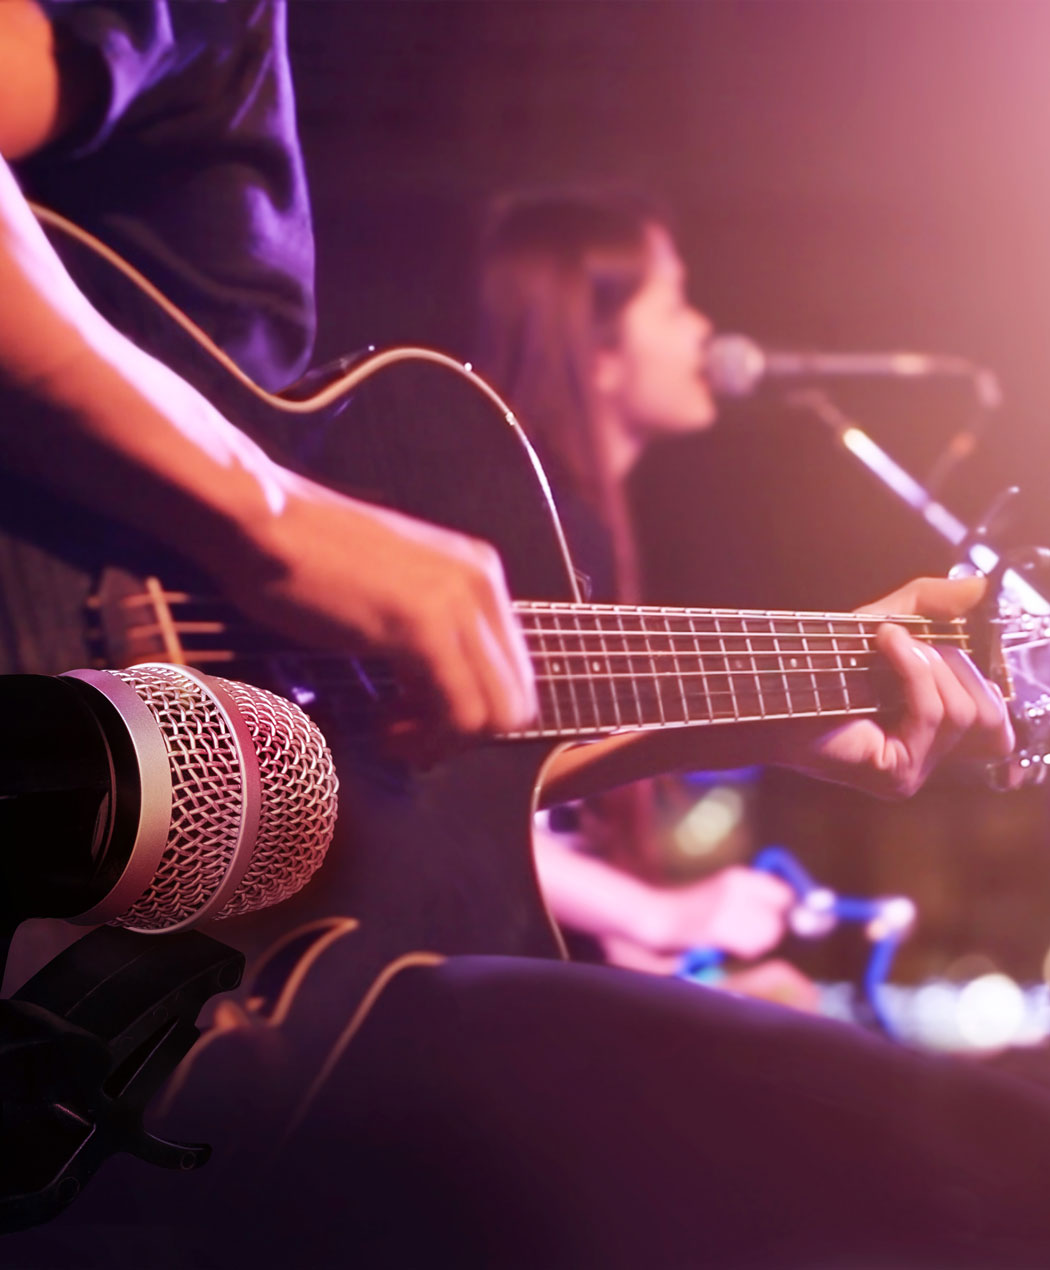 close up view of man playing guitar with woman singing into microphone in the background